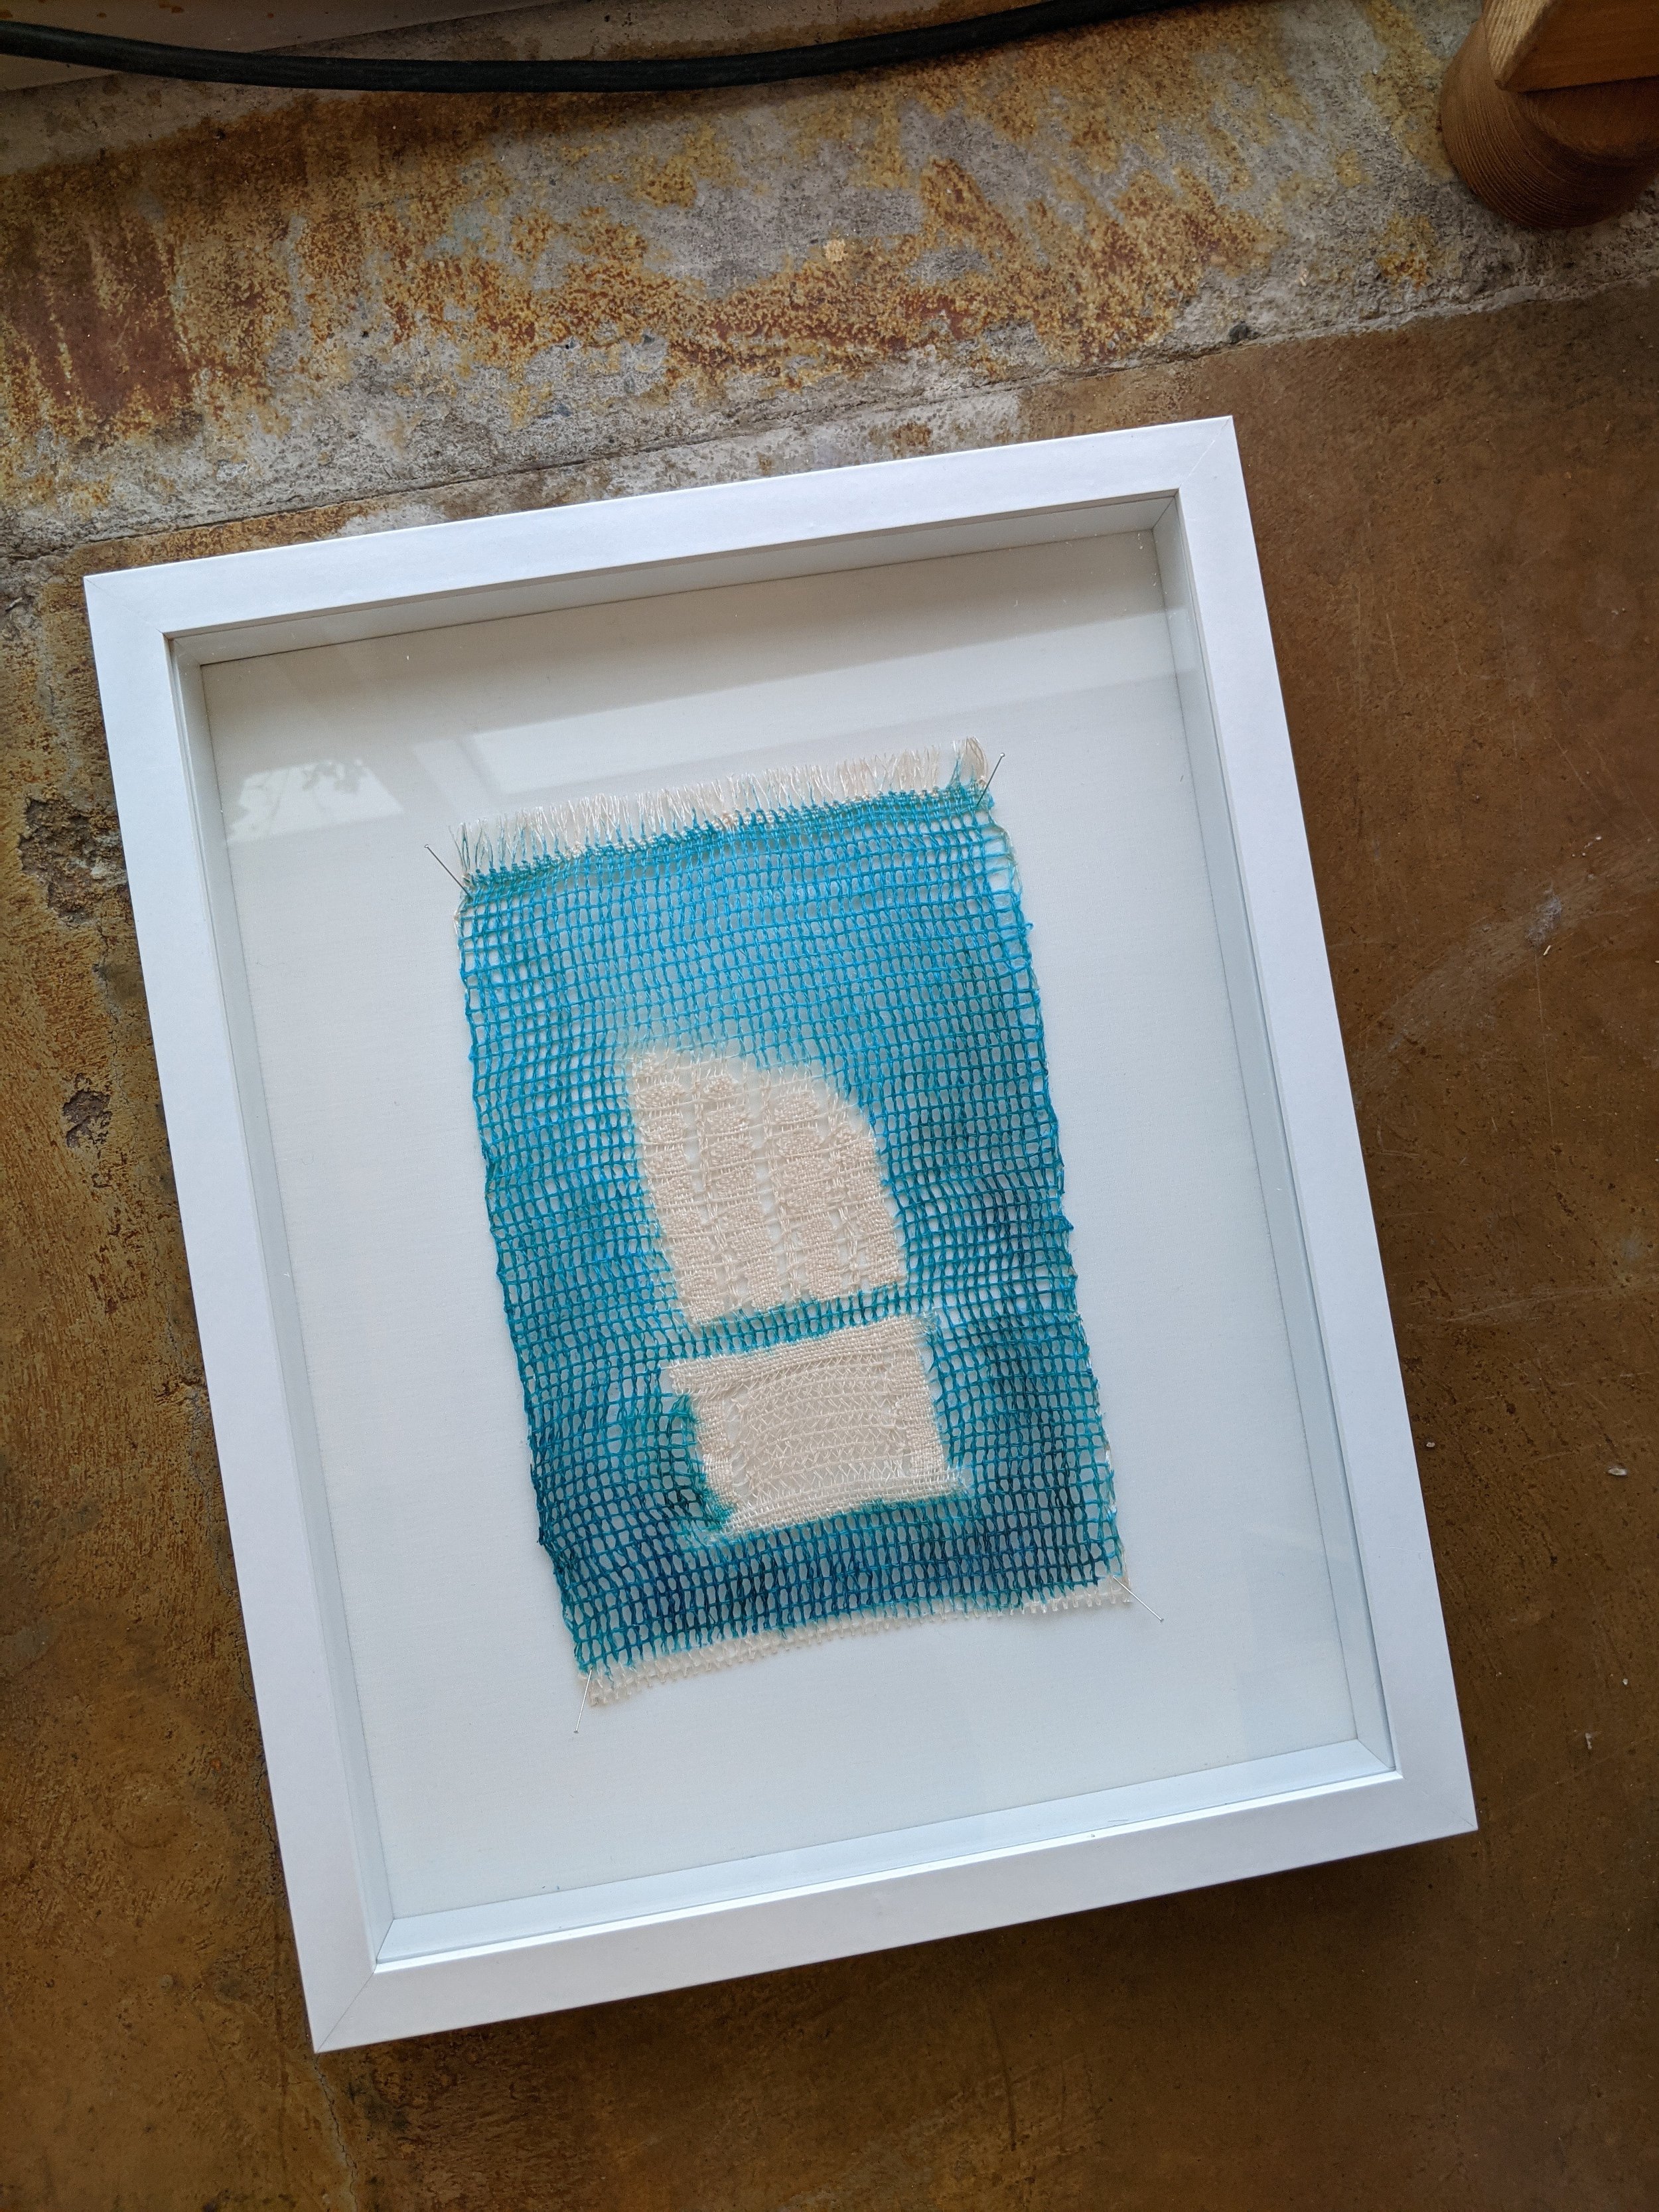  column hand woven gauze; linen and gouache 8 in x 6 in (frame 15 in x 12 in) 2020 